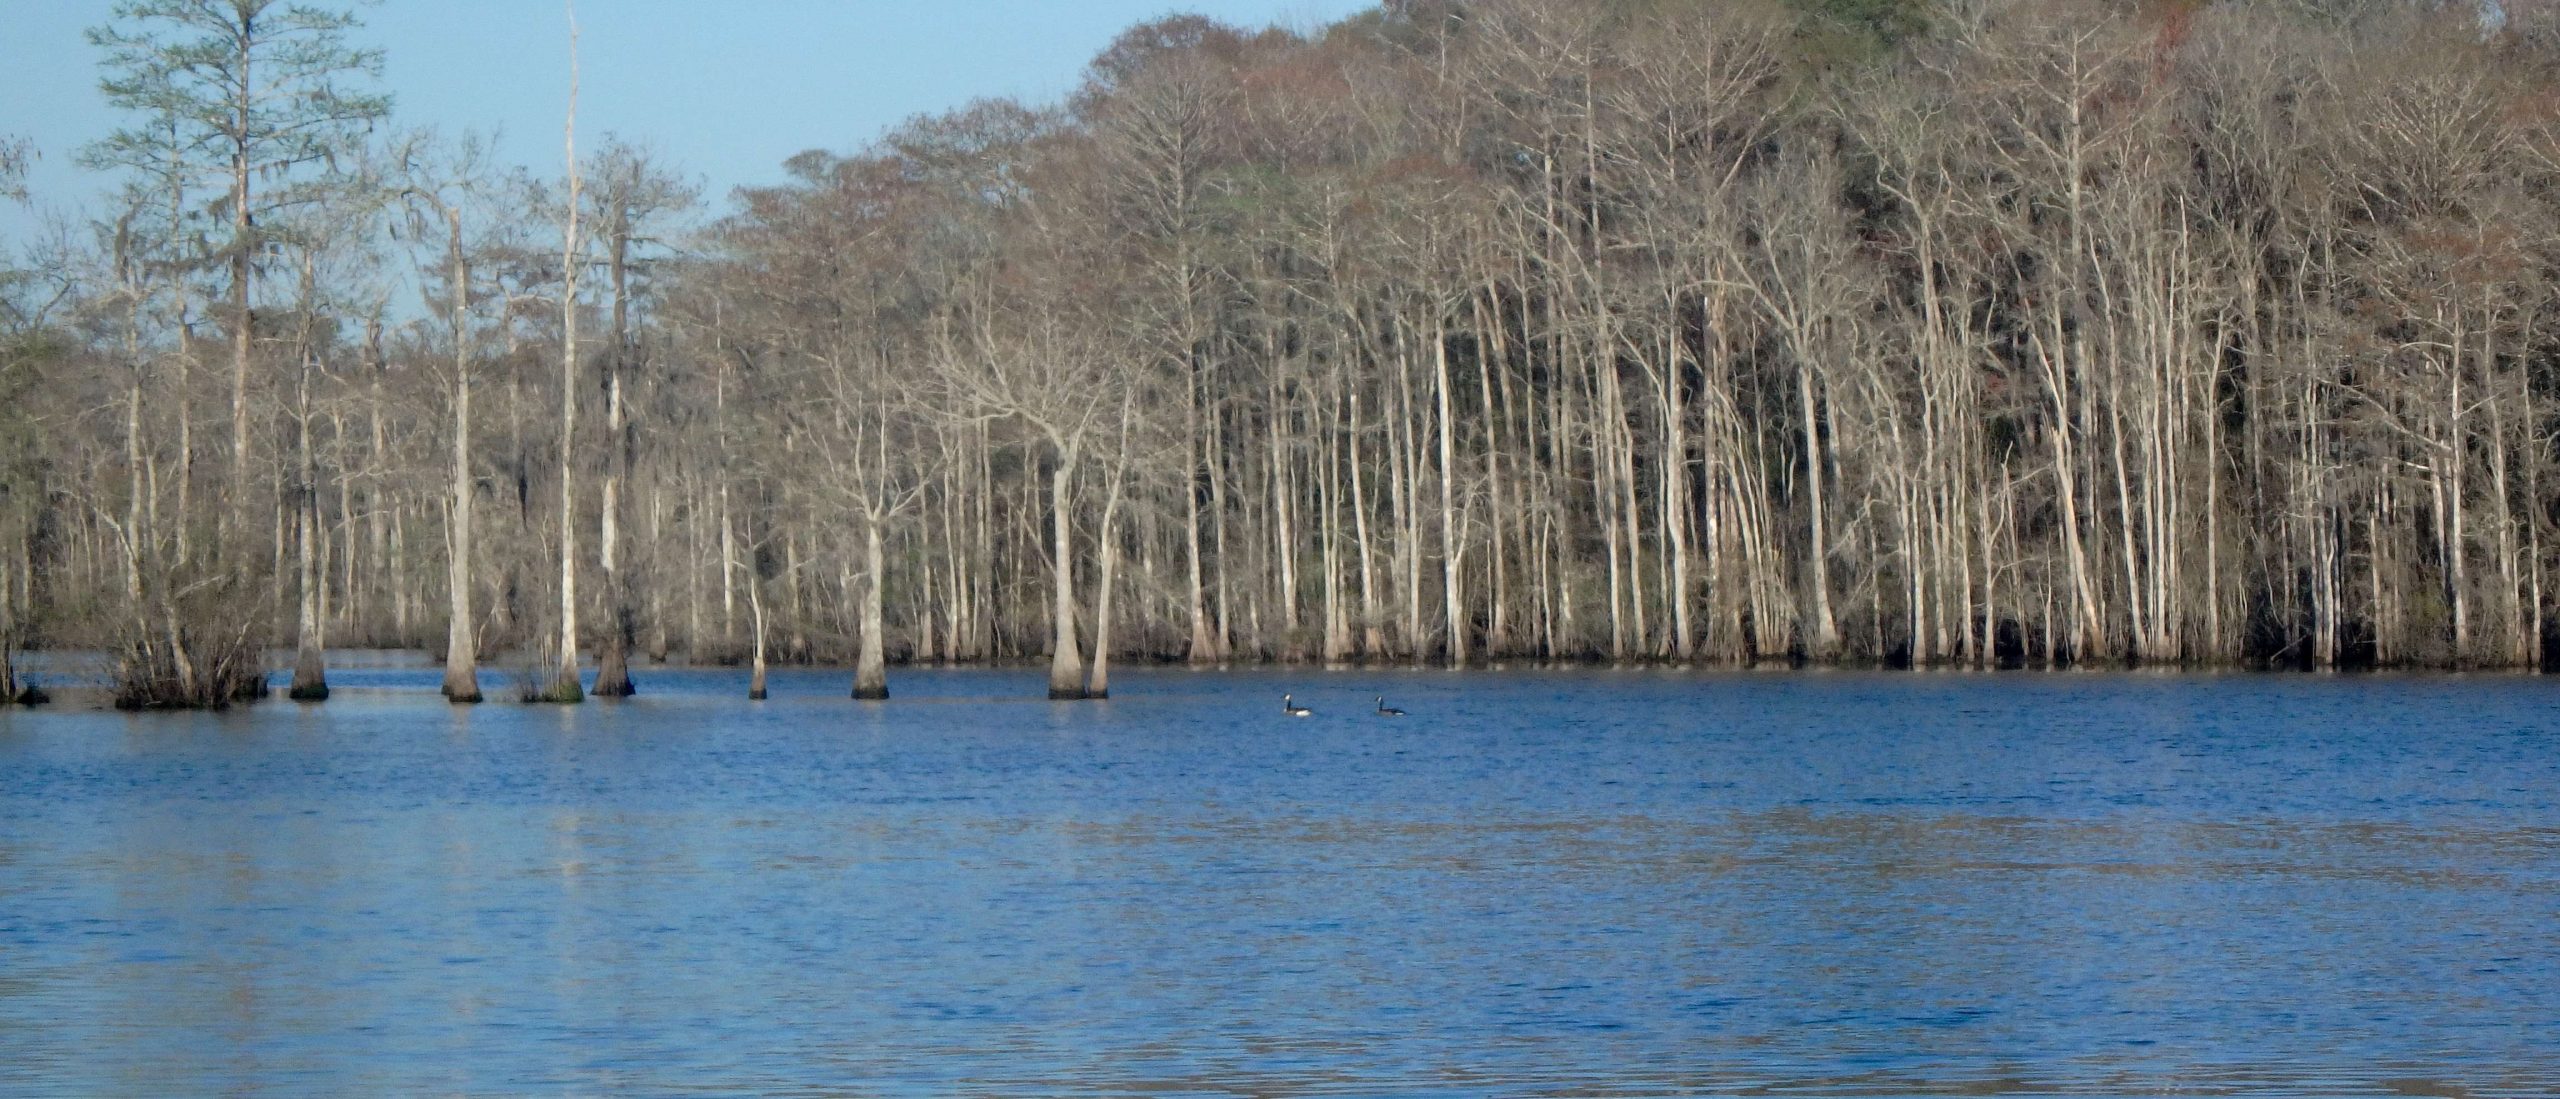 The key in this system seemed to targeting structure like this submerged treeline, which provided ample cover for feeding fish. Especially when youâve got moving water, even if the current is minimal, finding structure were bass might ambush their prey can be crucial.